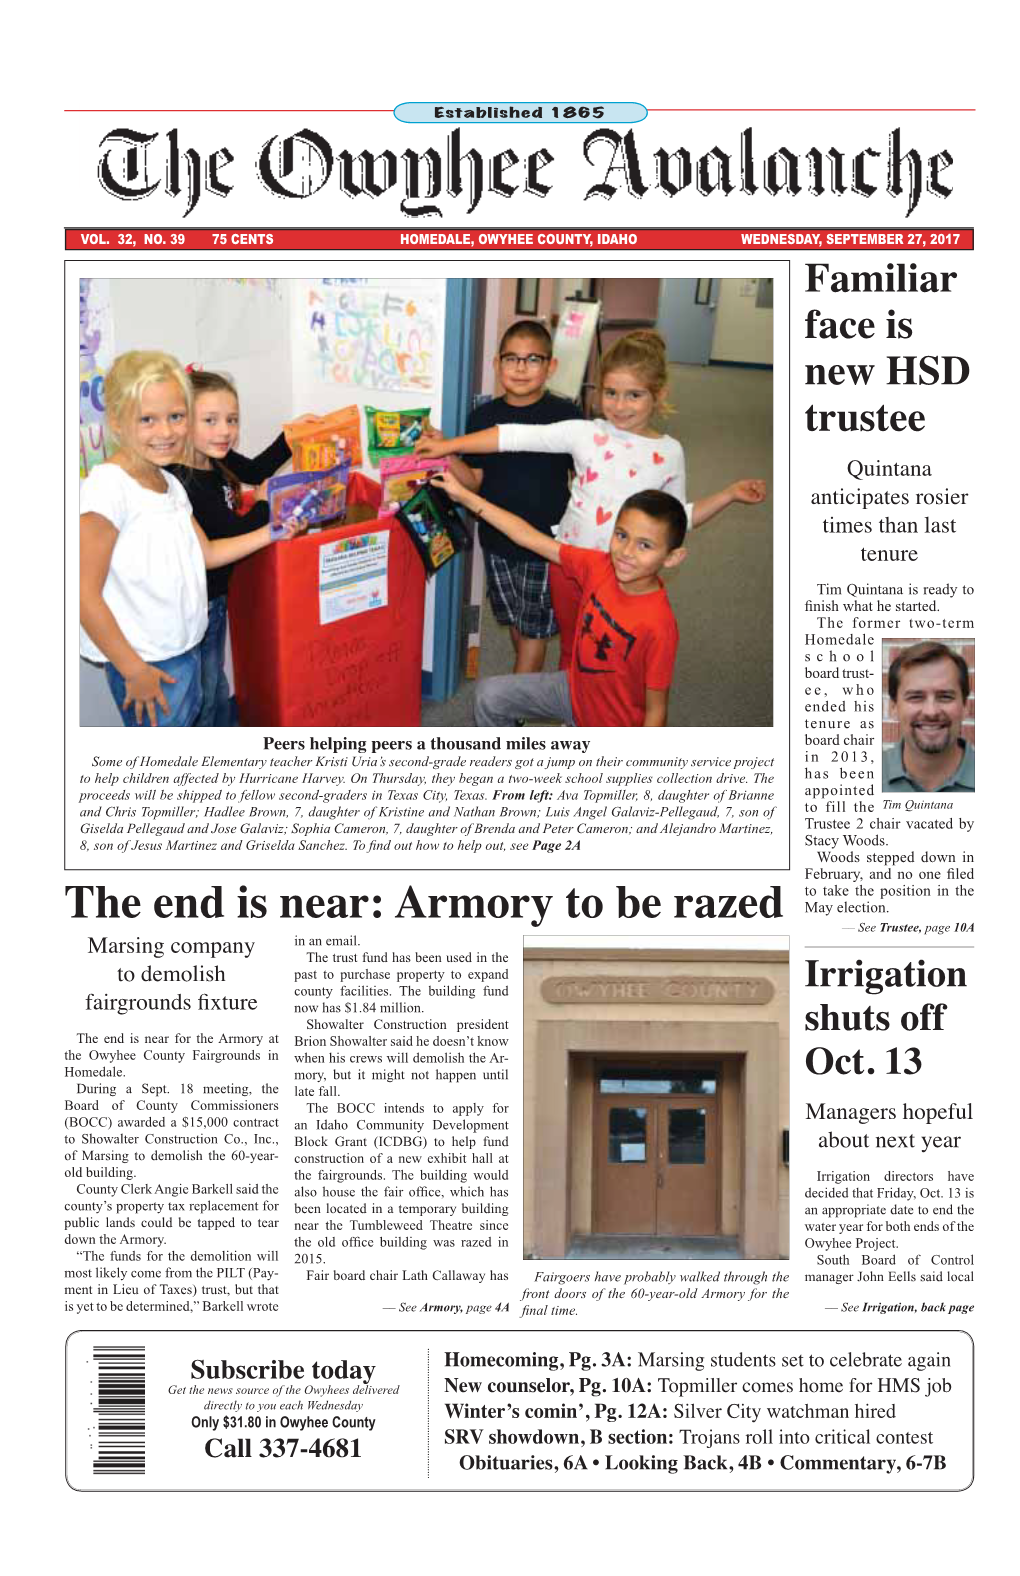 HOMEDALE, OWYHEE COUNTY, IDAHO WEDNESDAY, SEPTEMBER 27, 2017 Familiar Face Is New HSD Trustee Quintana Anticipates Rosier Times Than Last Tenure